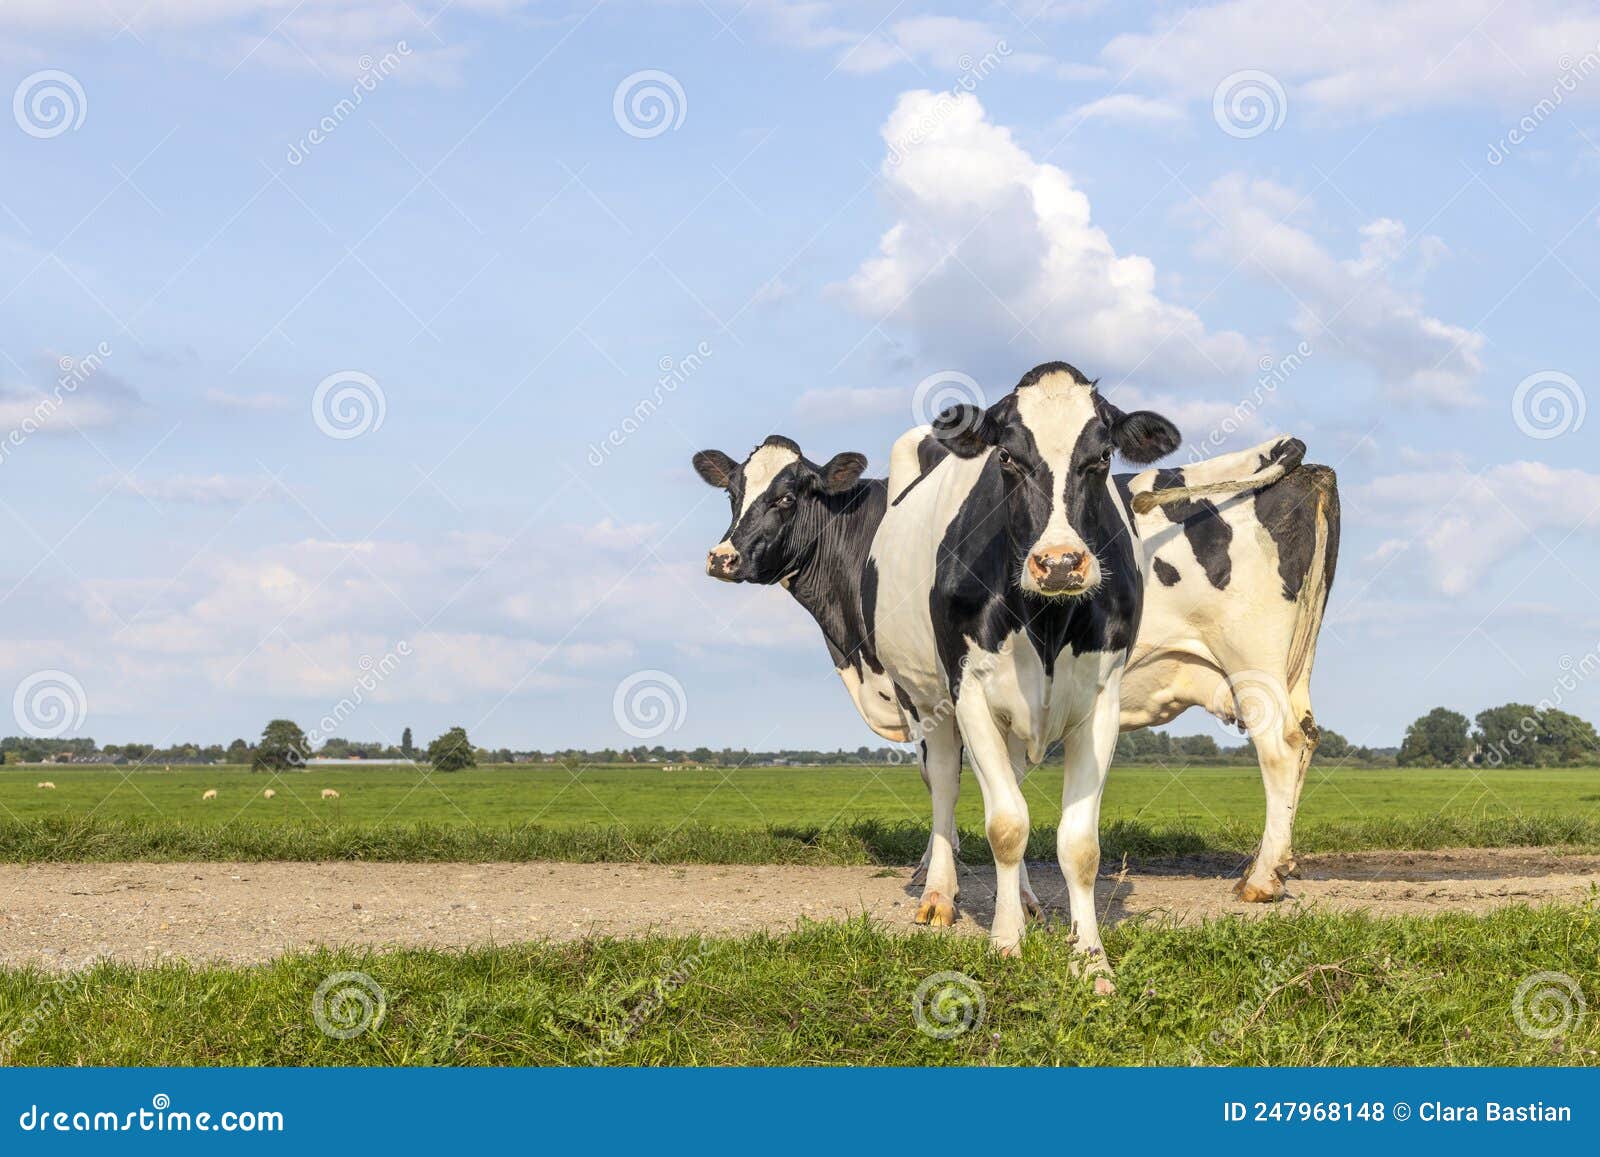 Sassy Cows Full Length on a Path in a Field, 2 Black and White Holstein ...